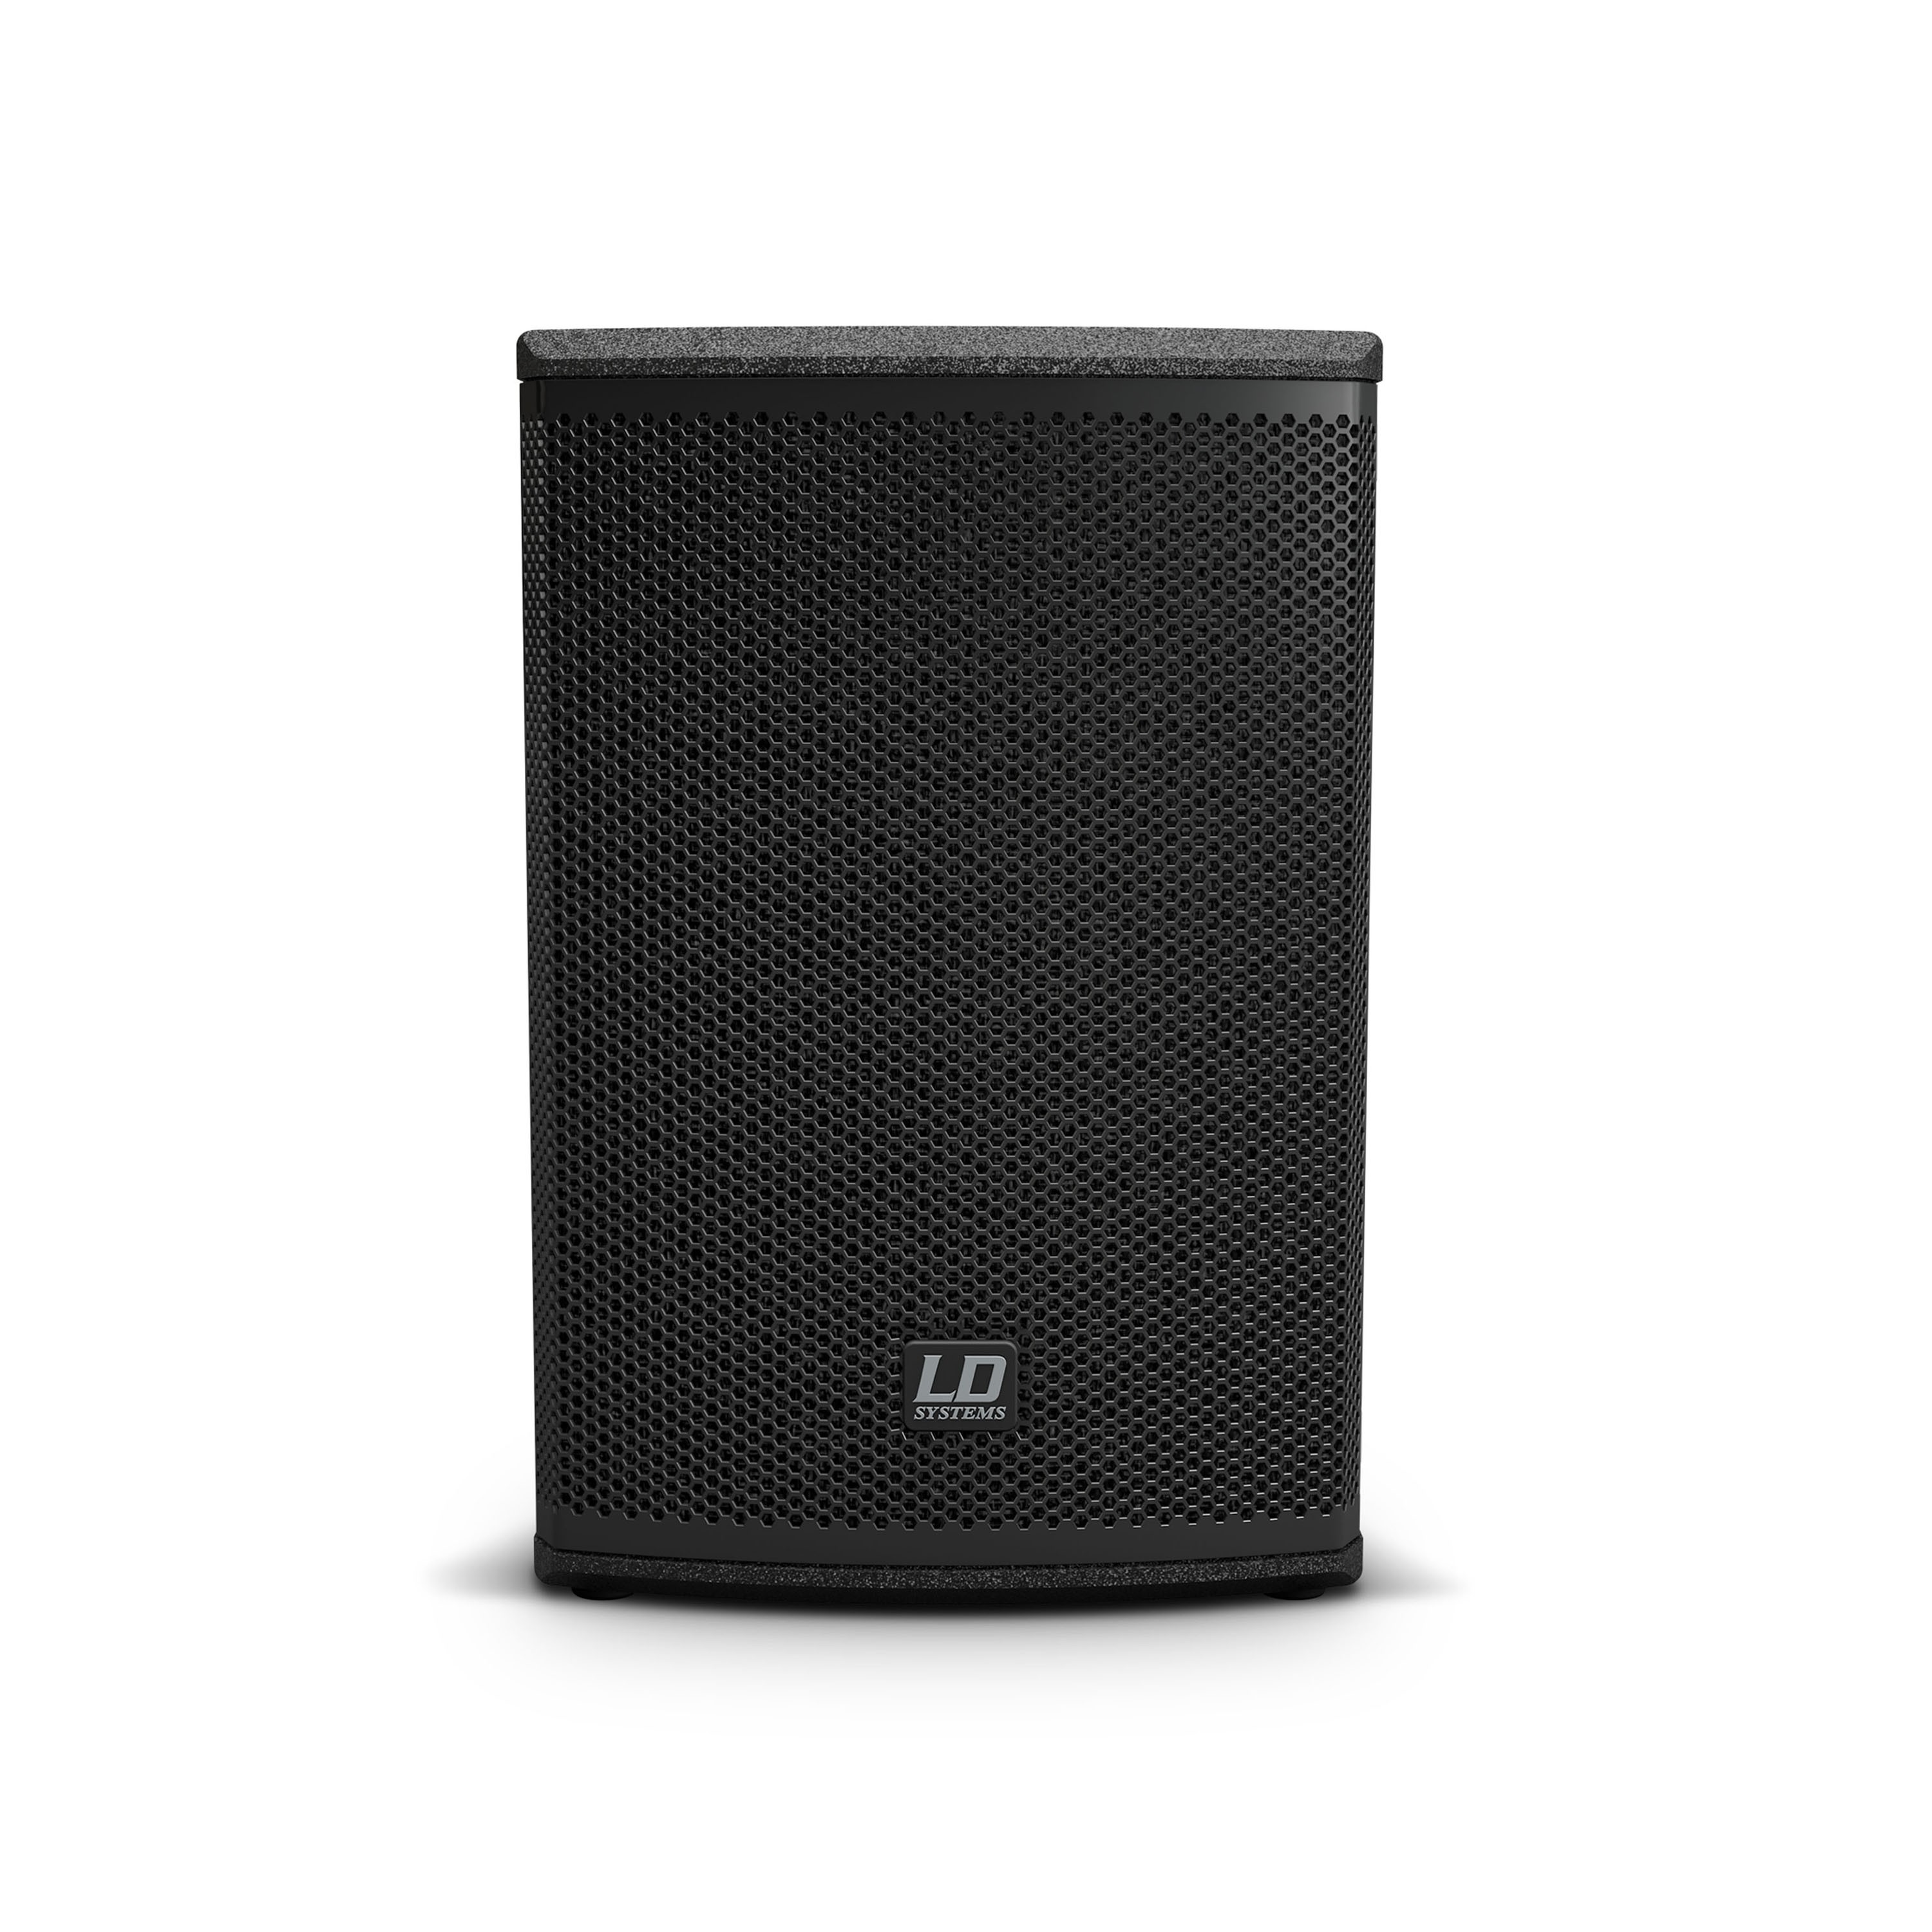 Ld Systems Mix 6 A G3 - Portable PA system - Variation 2